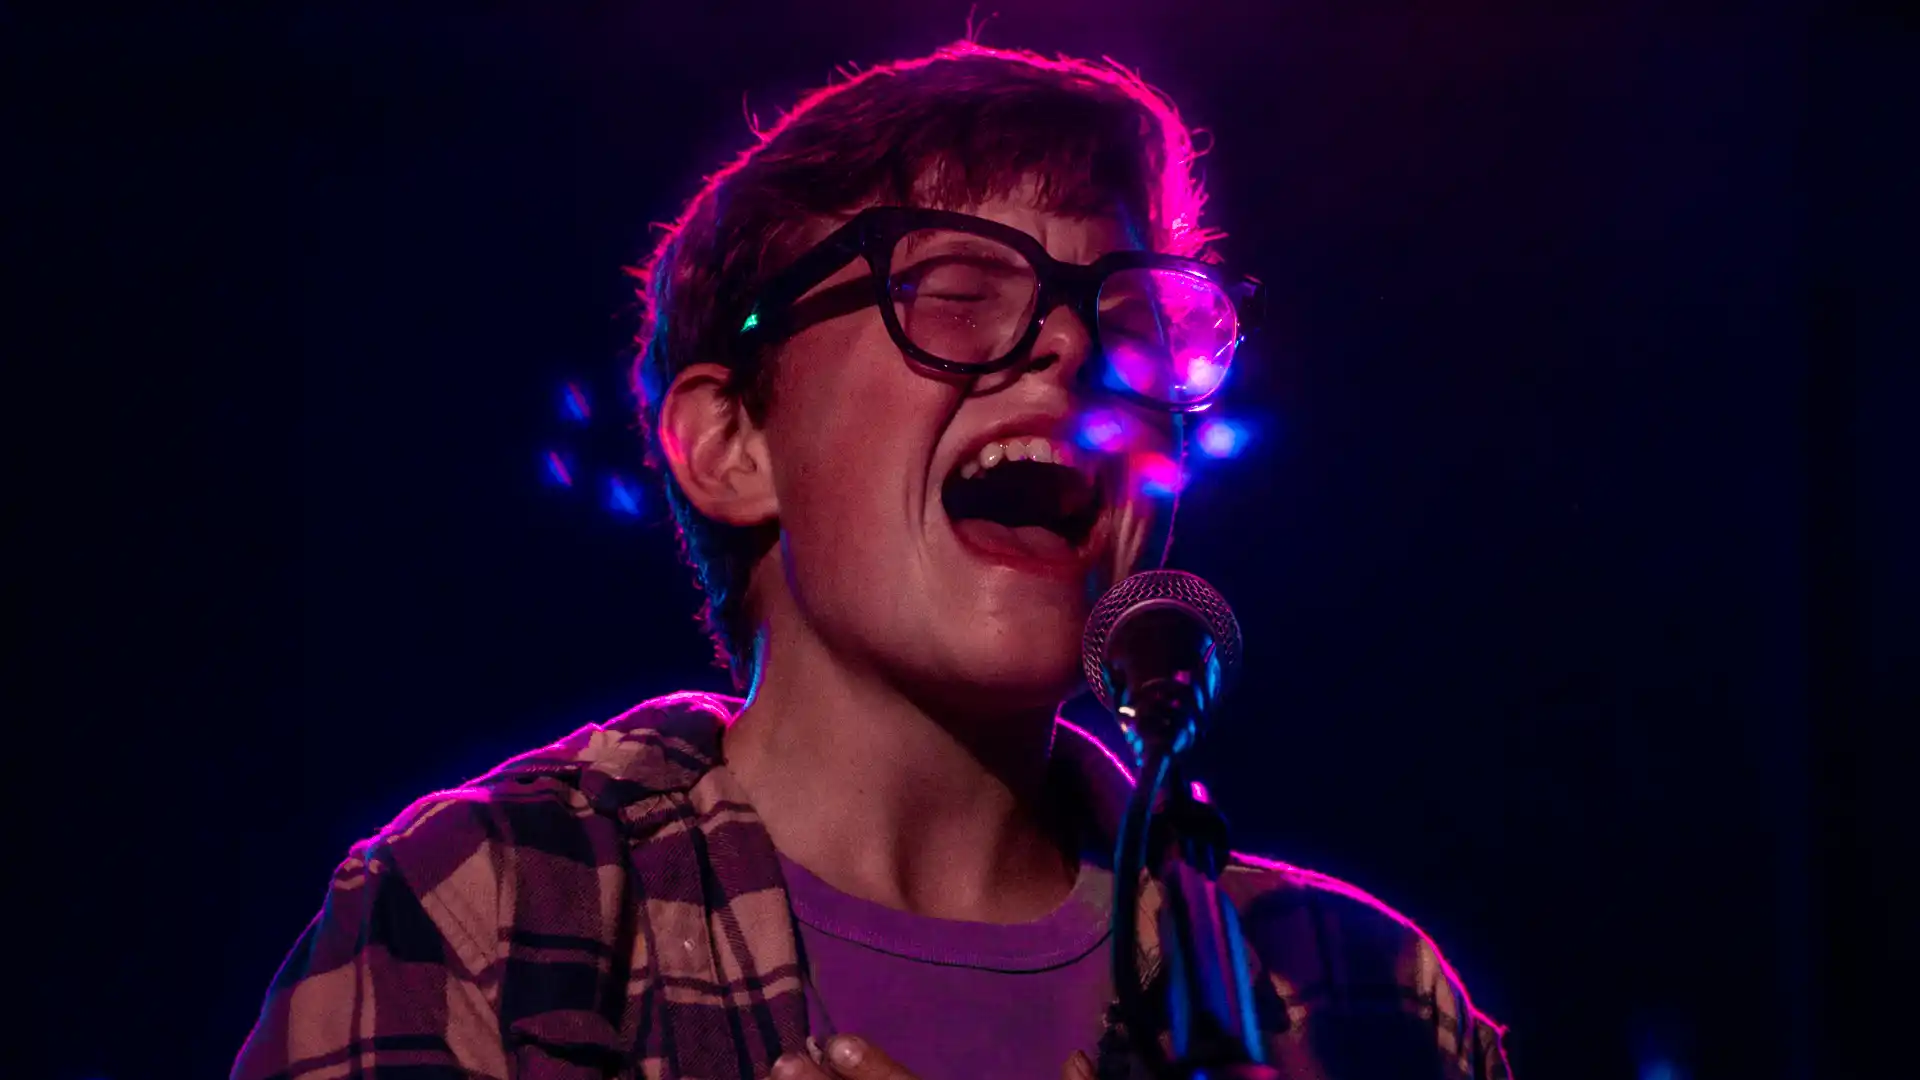 Carson Ferris passionately singing into a microphone.